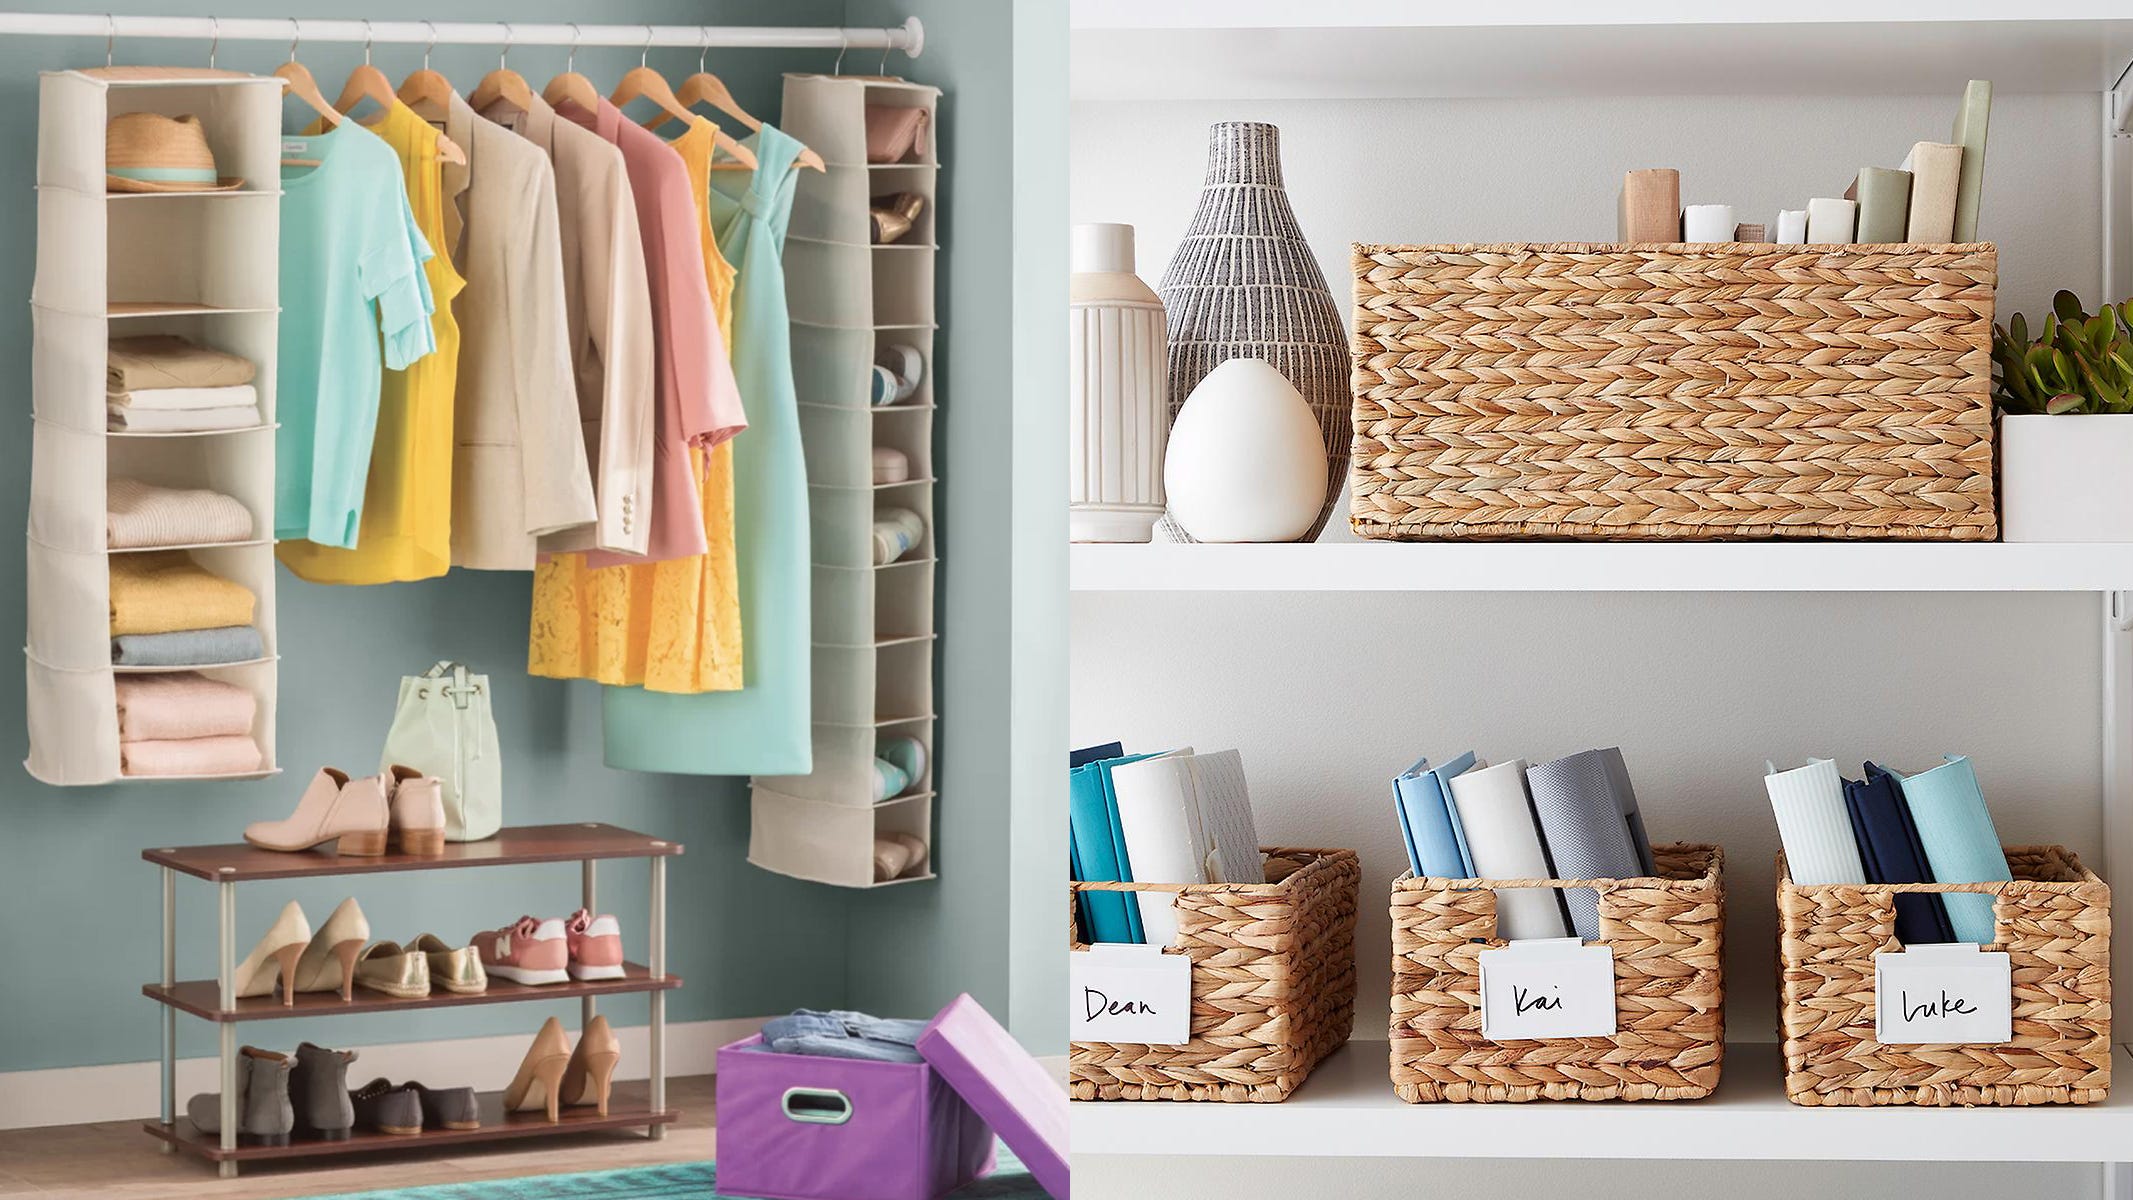 Dial In Your Dream Drawer: 10 Genius Ways to Organize With Spring Loaded Dividers